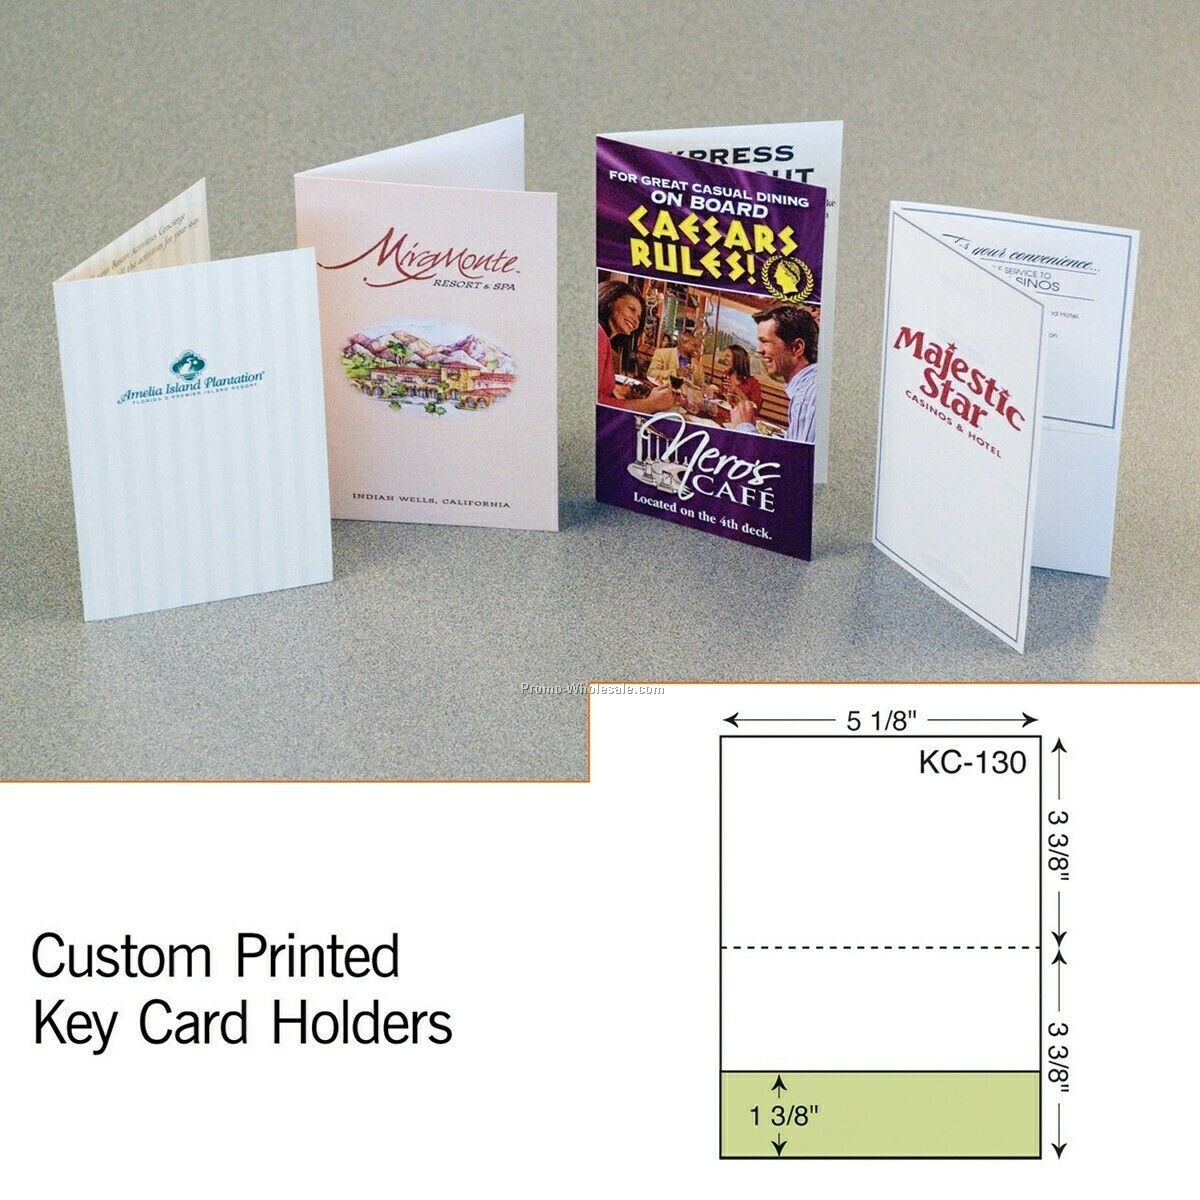 3-1/2"x6" Key Card W/ Double Pockets (Foil Stamp/Emboss)